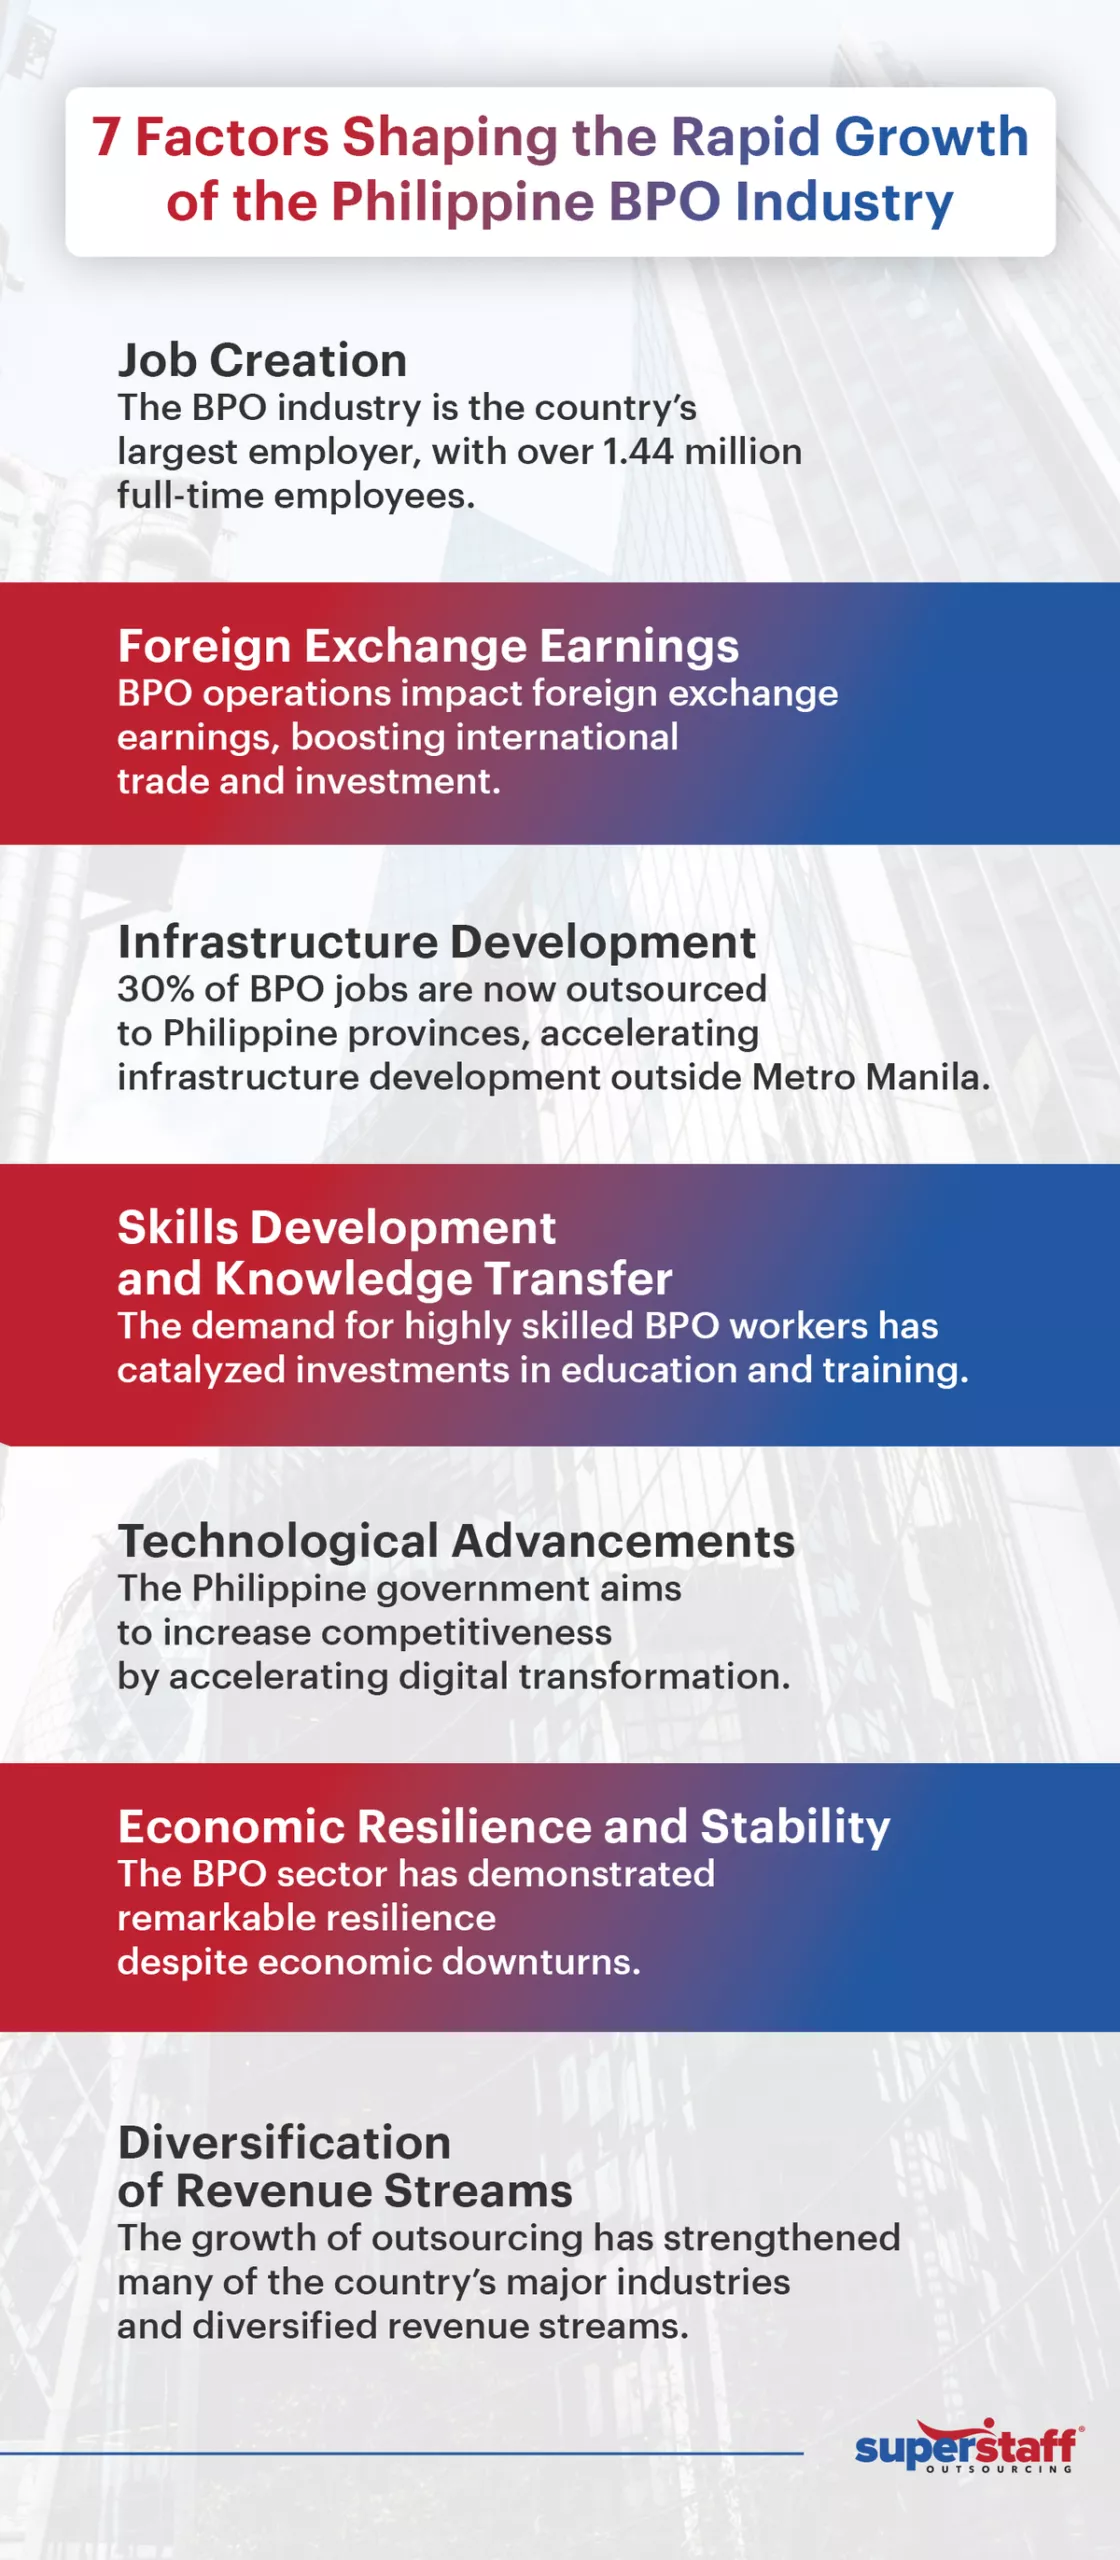 An infographic shows a list of factors boosting the BPO industry in the Philippines.